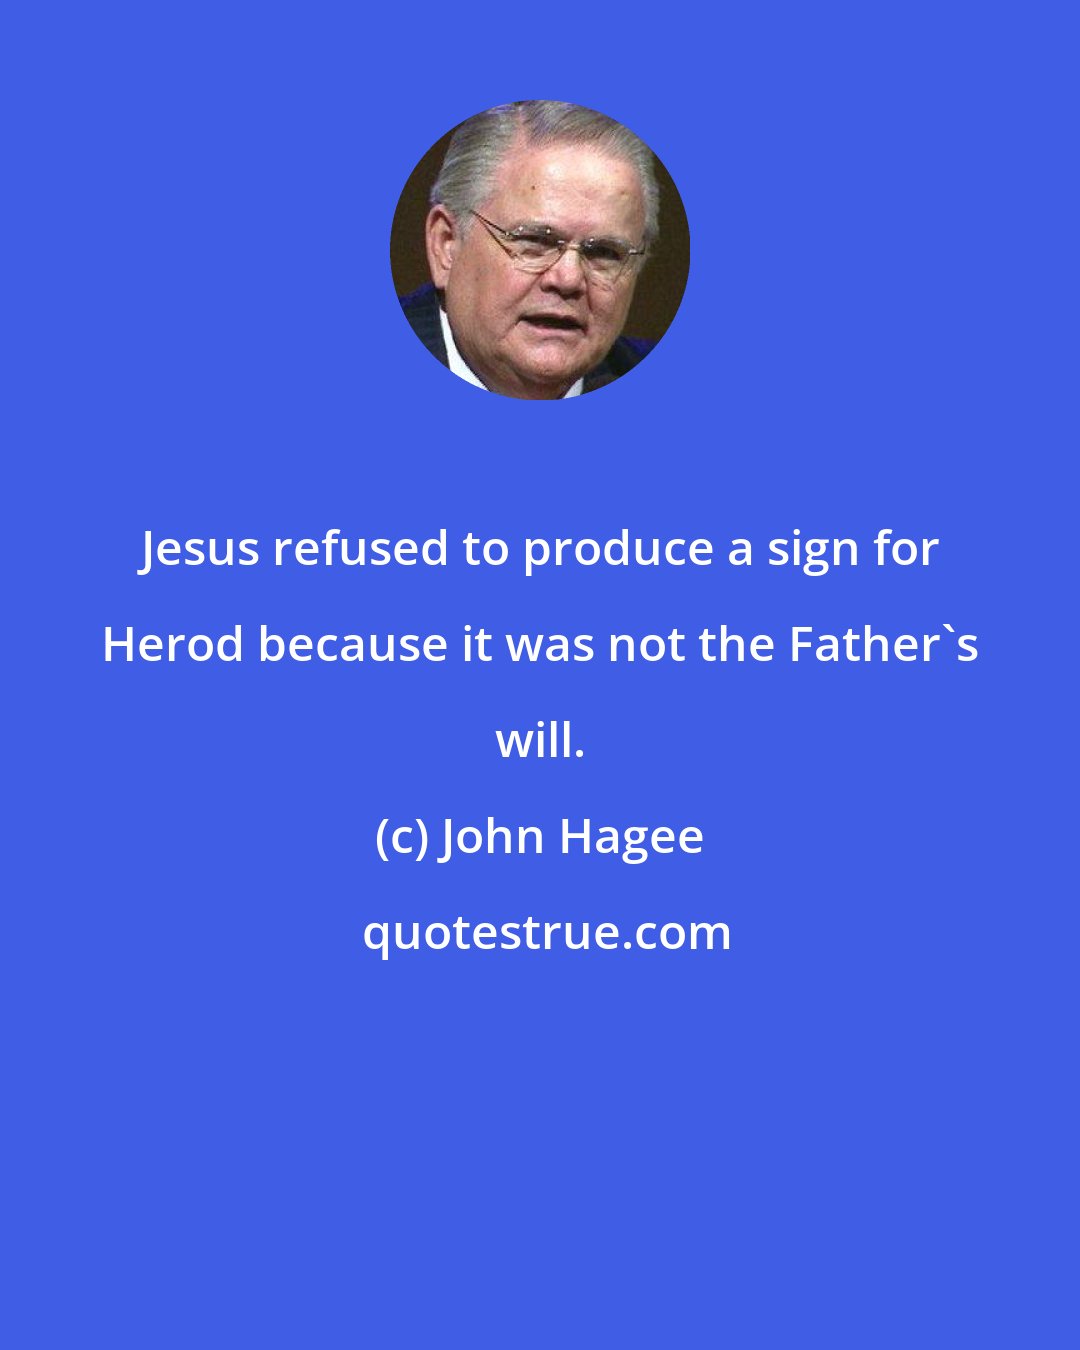 John Hagee: Jesus refused to produce a sign for Herod because it was not the Father's will.